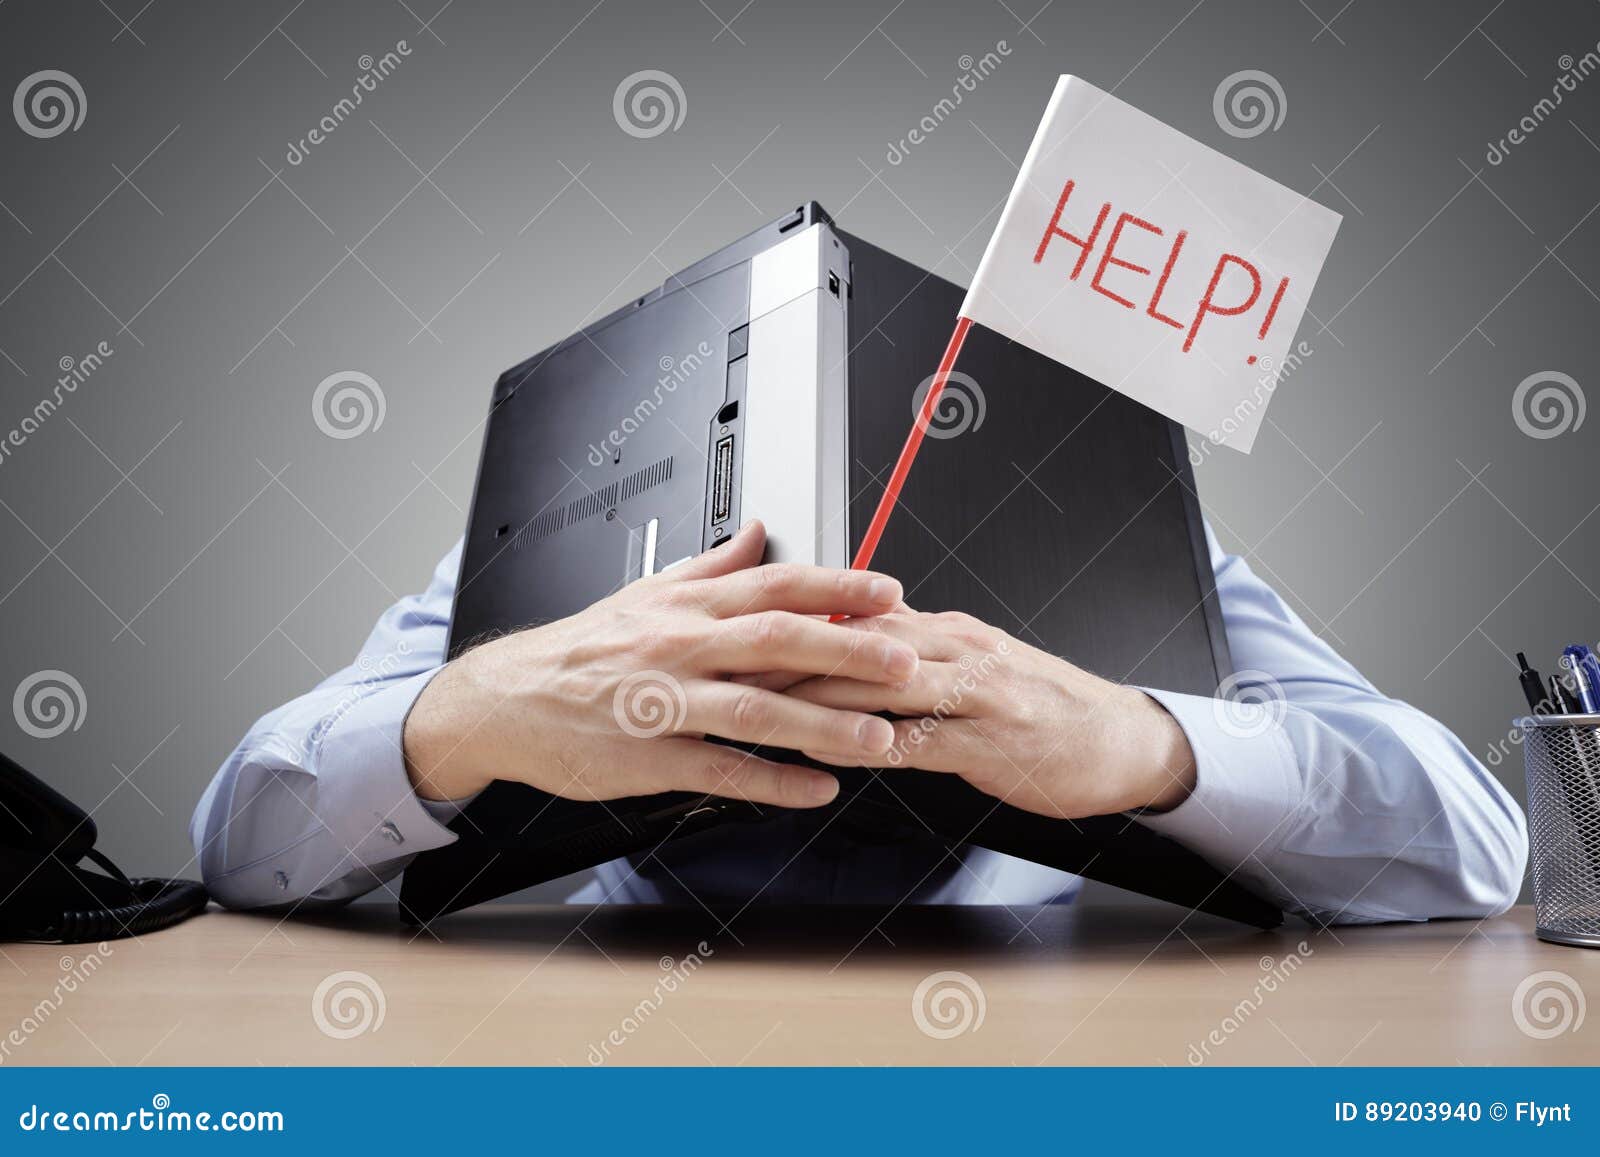 businessman burying his head under a laptop asking for help